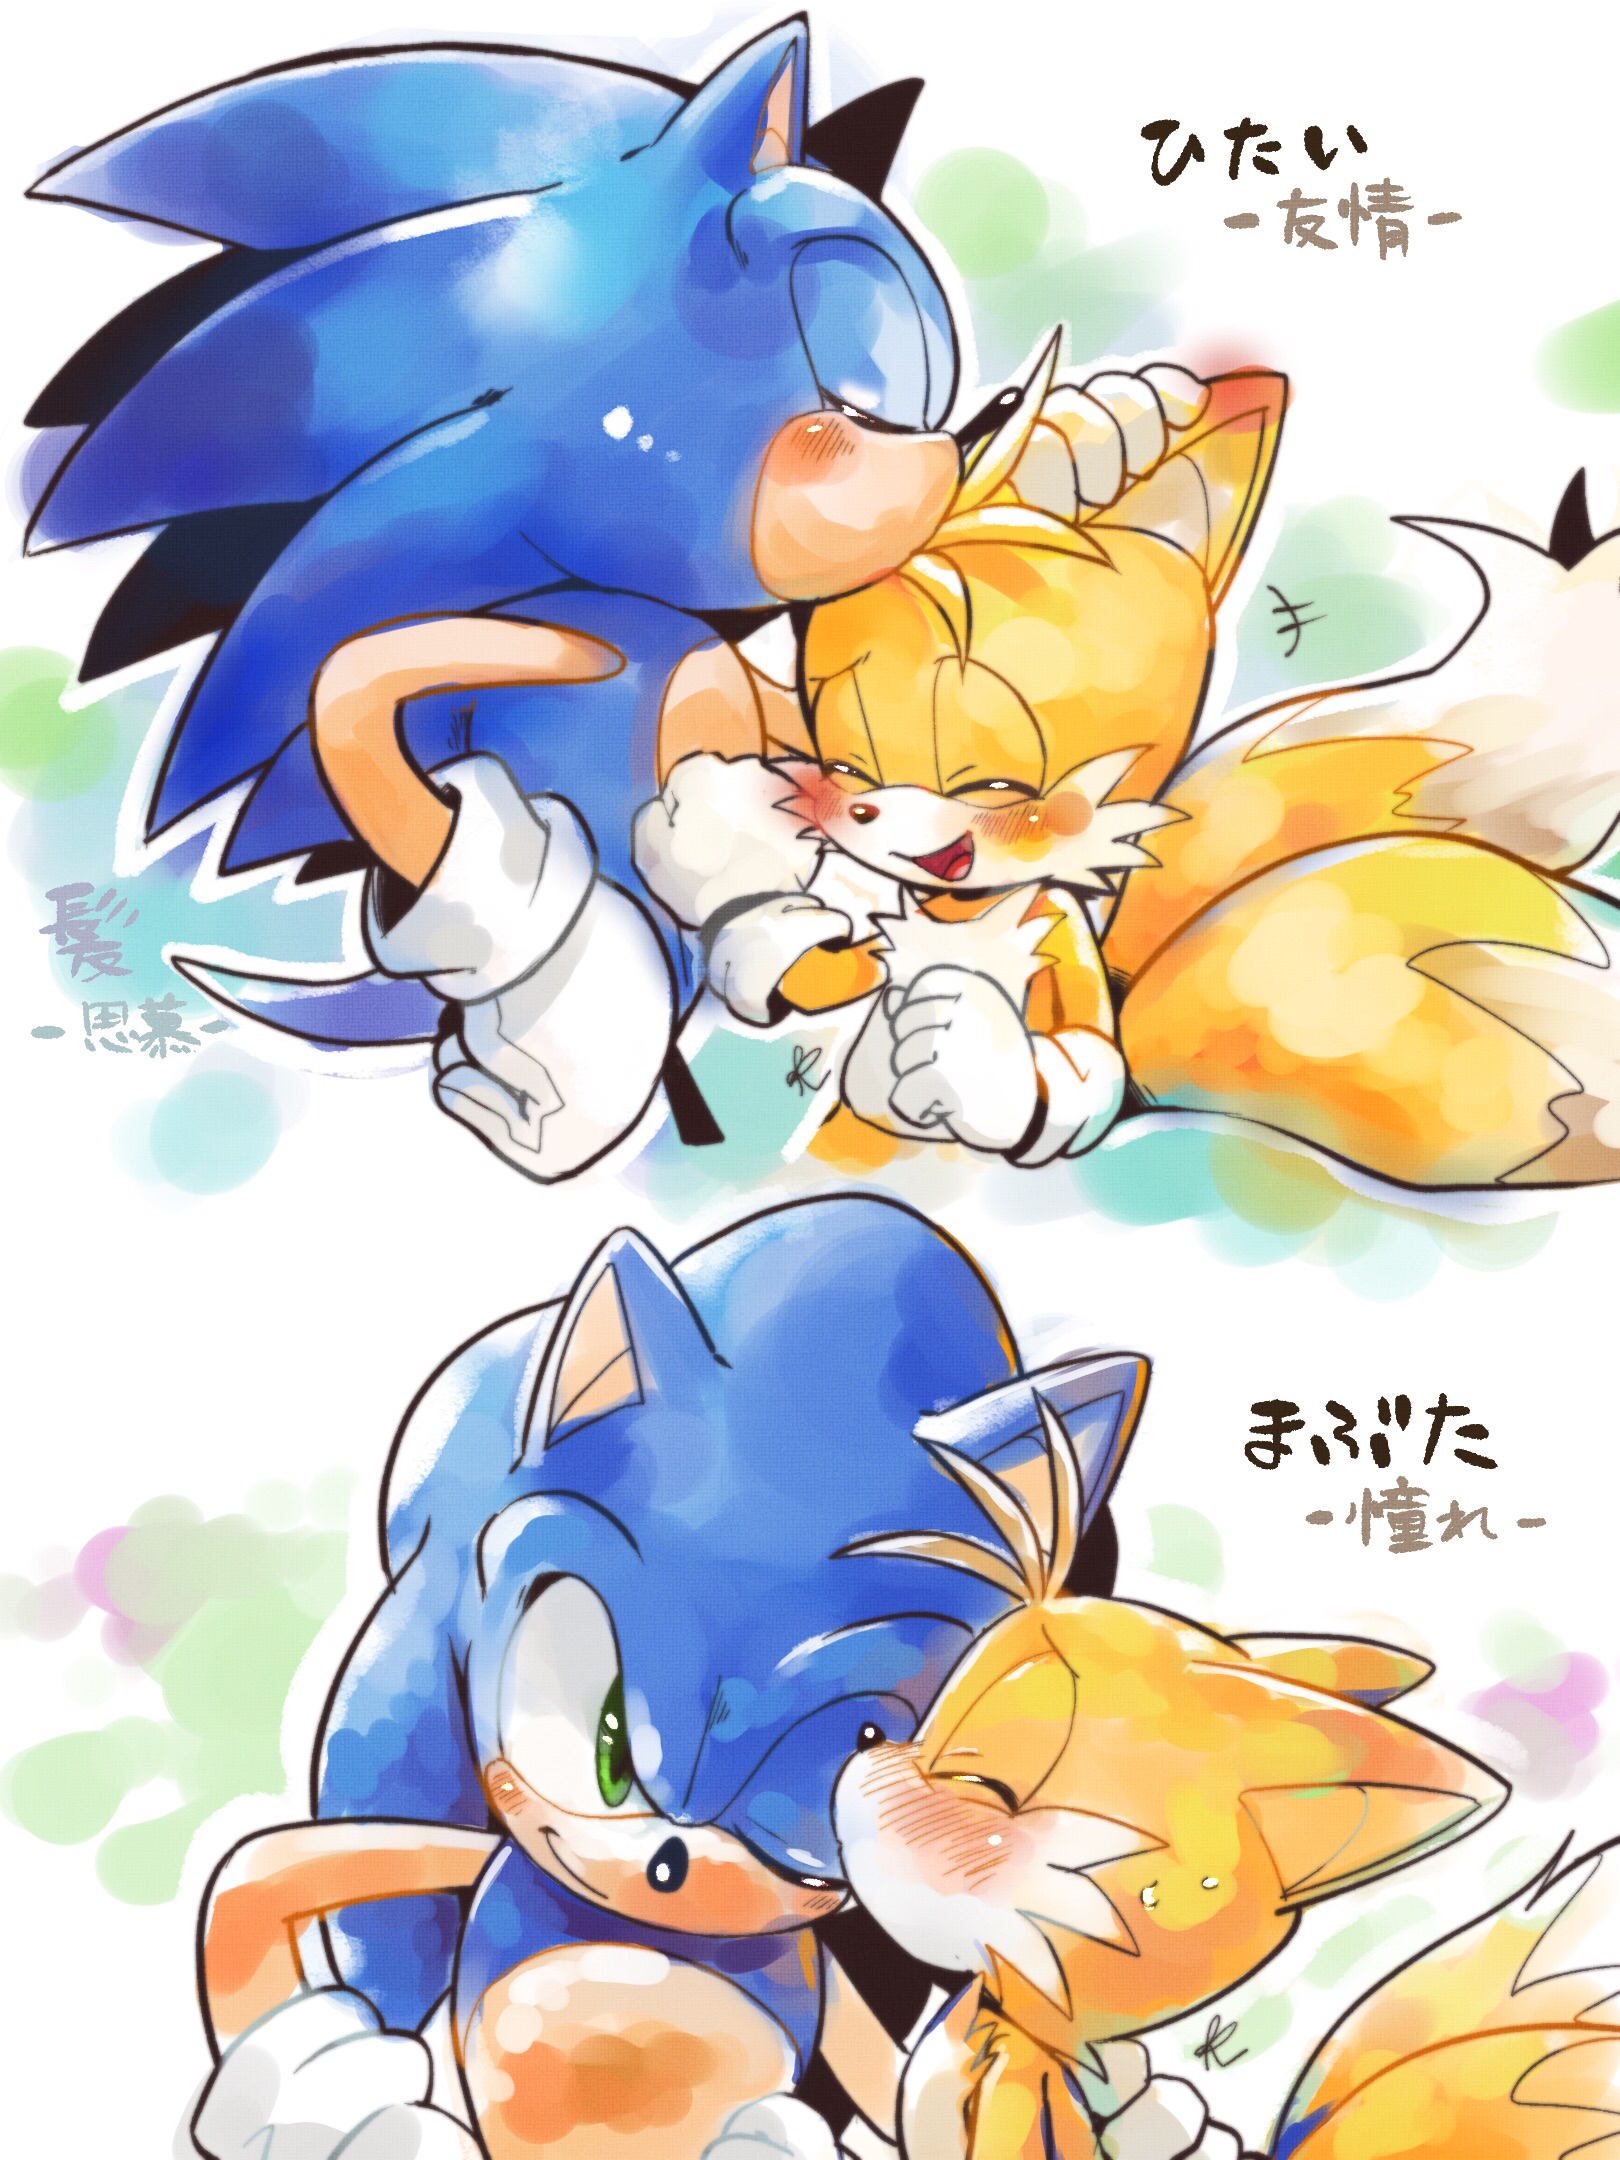 sonic the hedgehog and tails (sonic) drawn by misuta710